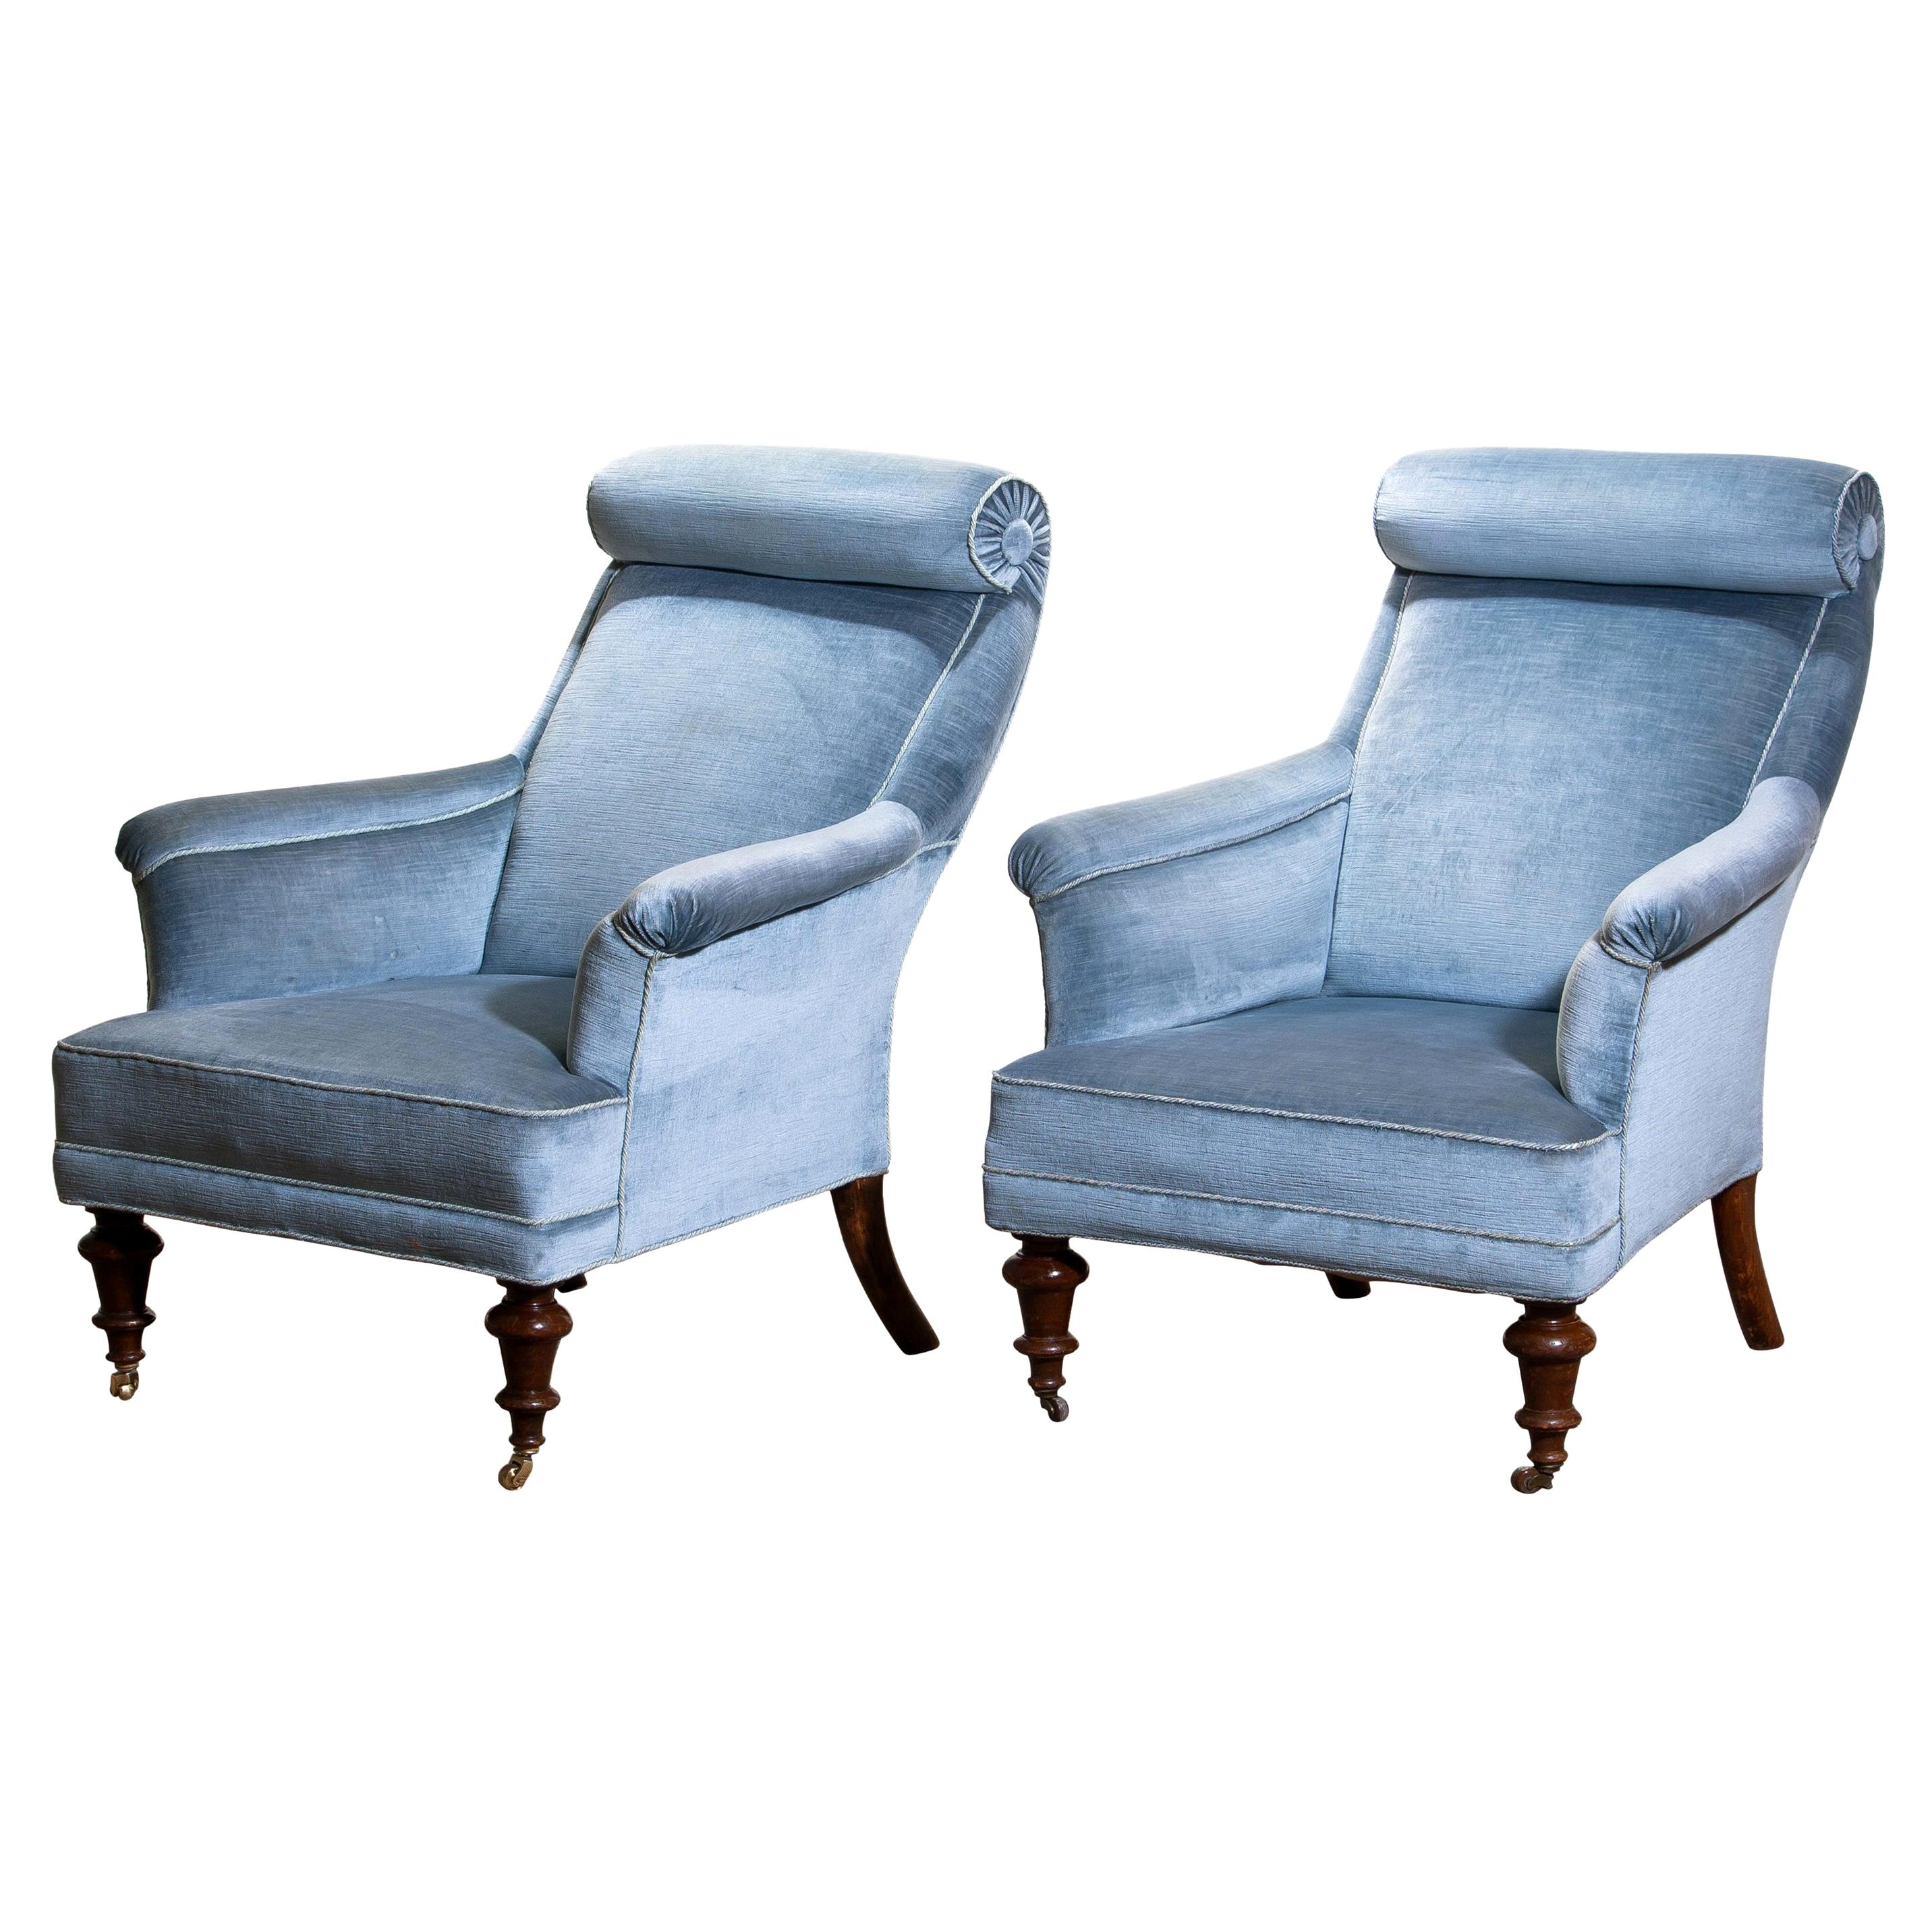 1900s Set of Two Ice Blue Velvet Dorothy Draper Style Bergère Club Lounge Chairs 1